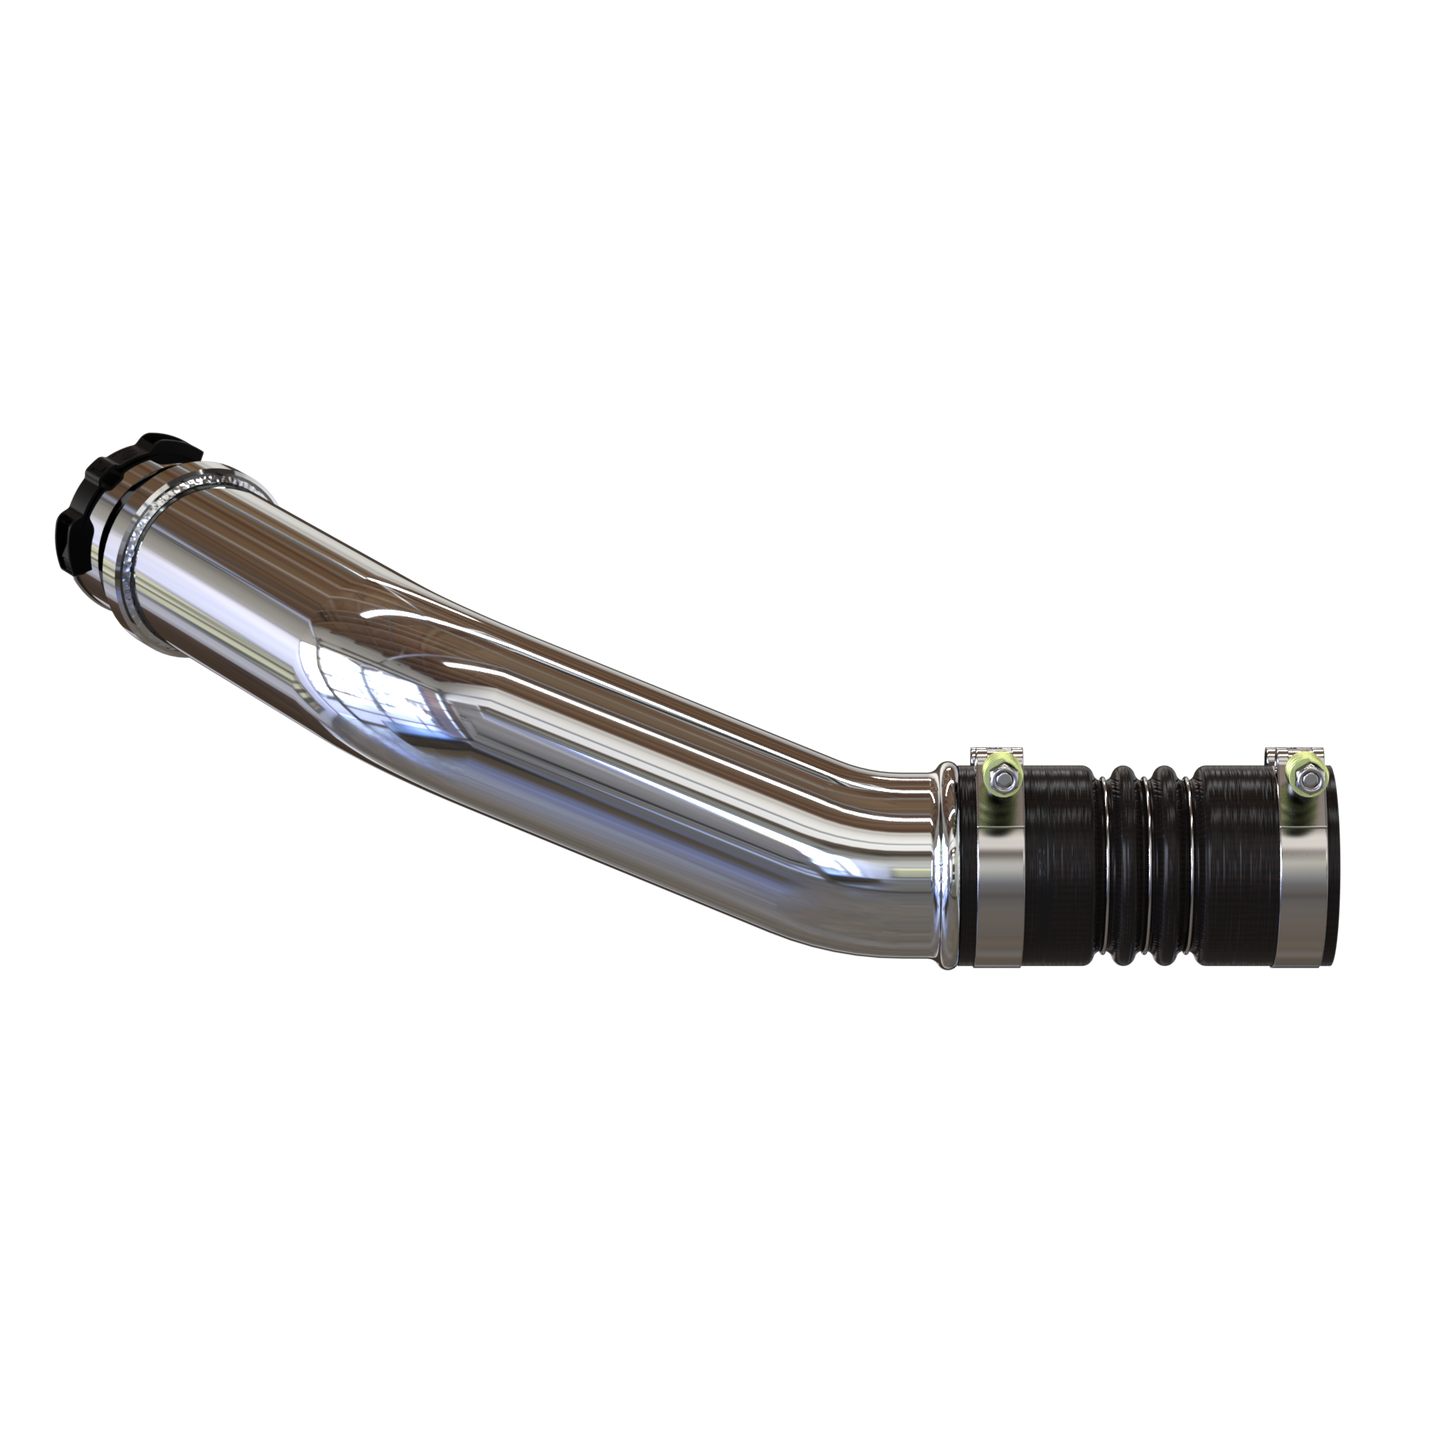 Hot Side Intercooler Pipe for 2011-2015 Ford Powerstroke 6.7L